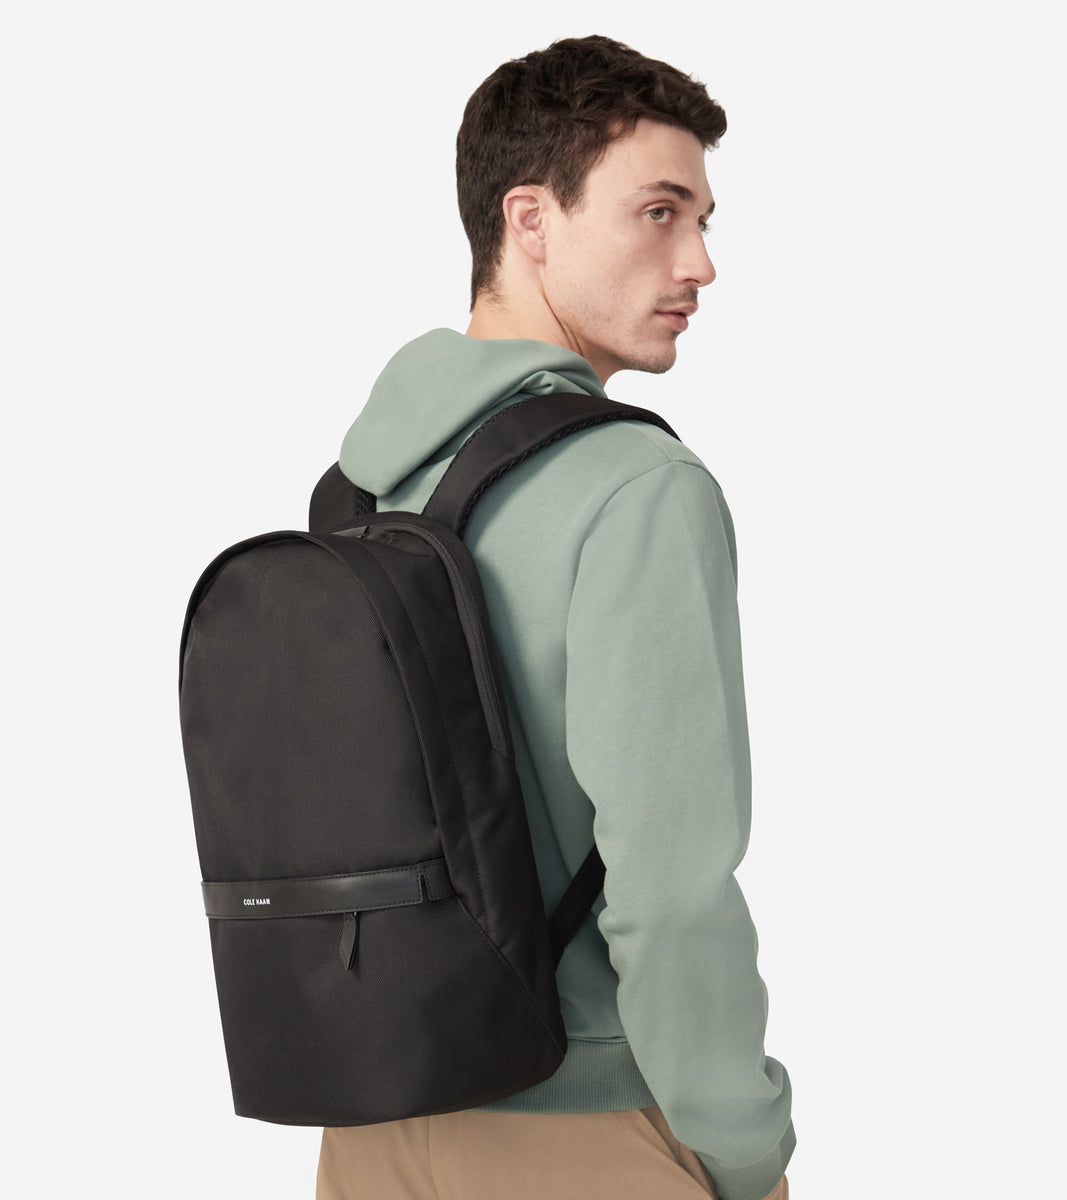 Go-To Backpack